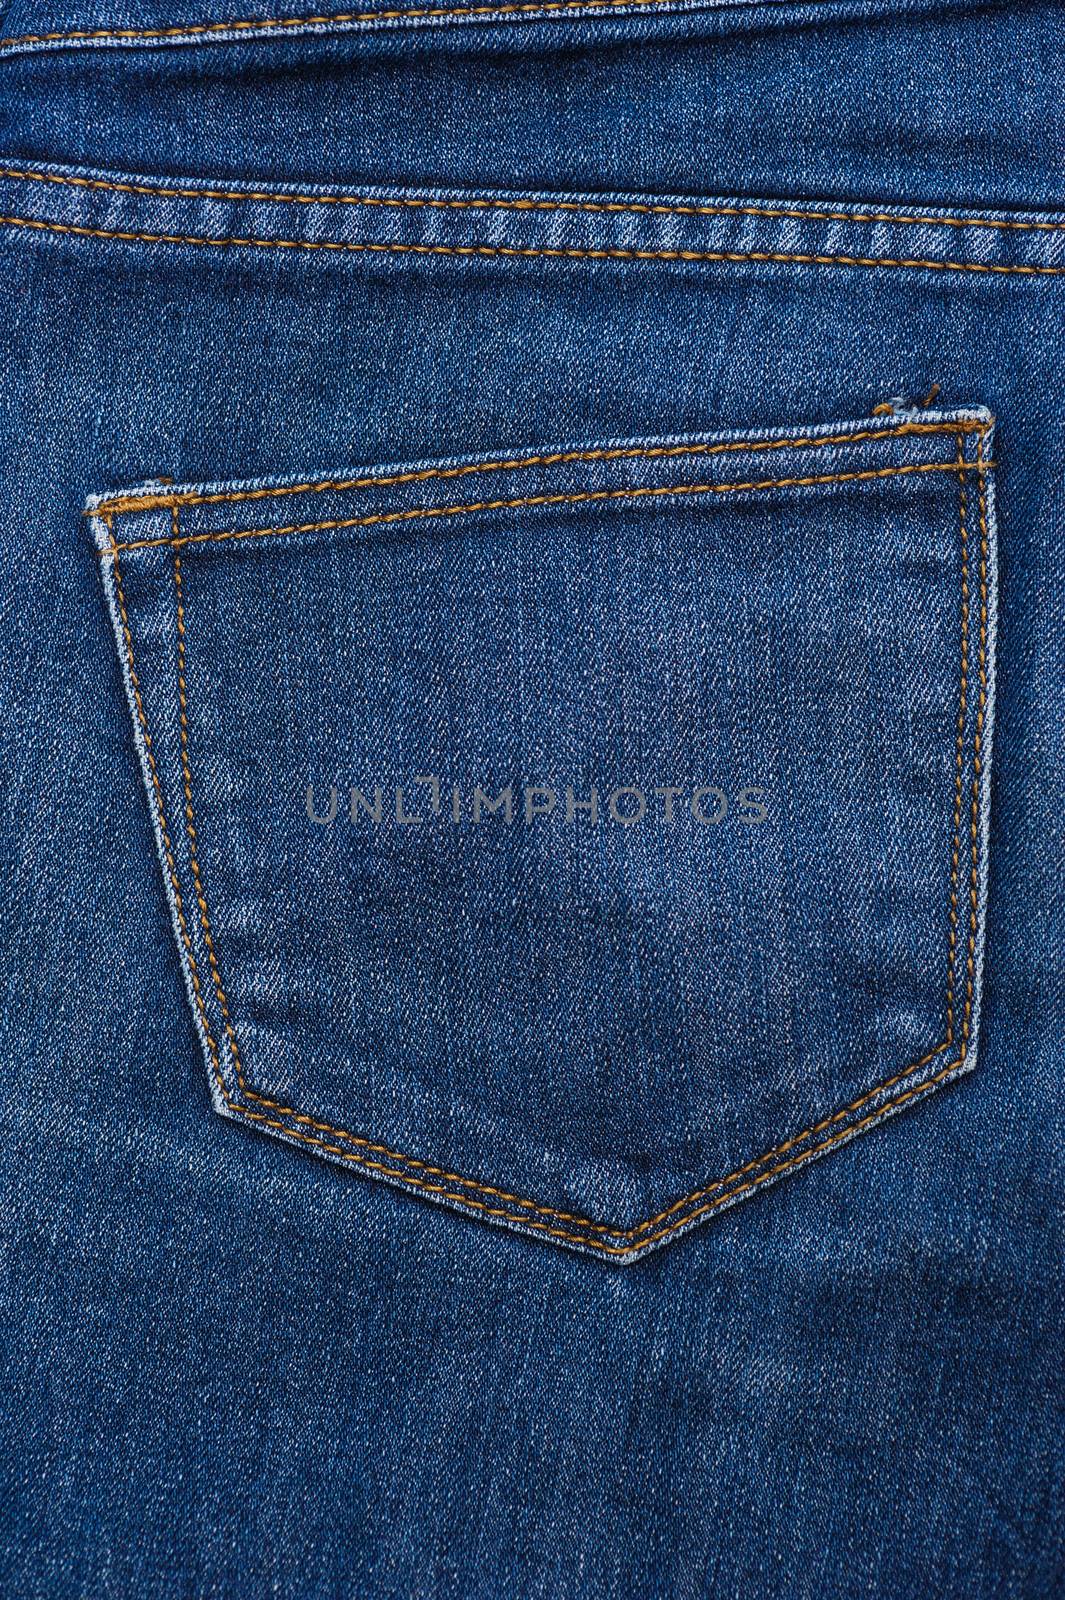 blue texture of jeans, stitching on the pants closeup.